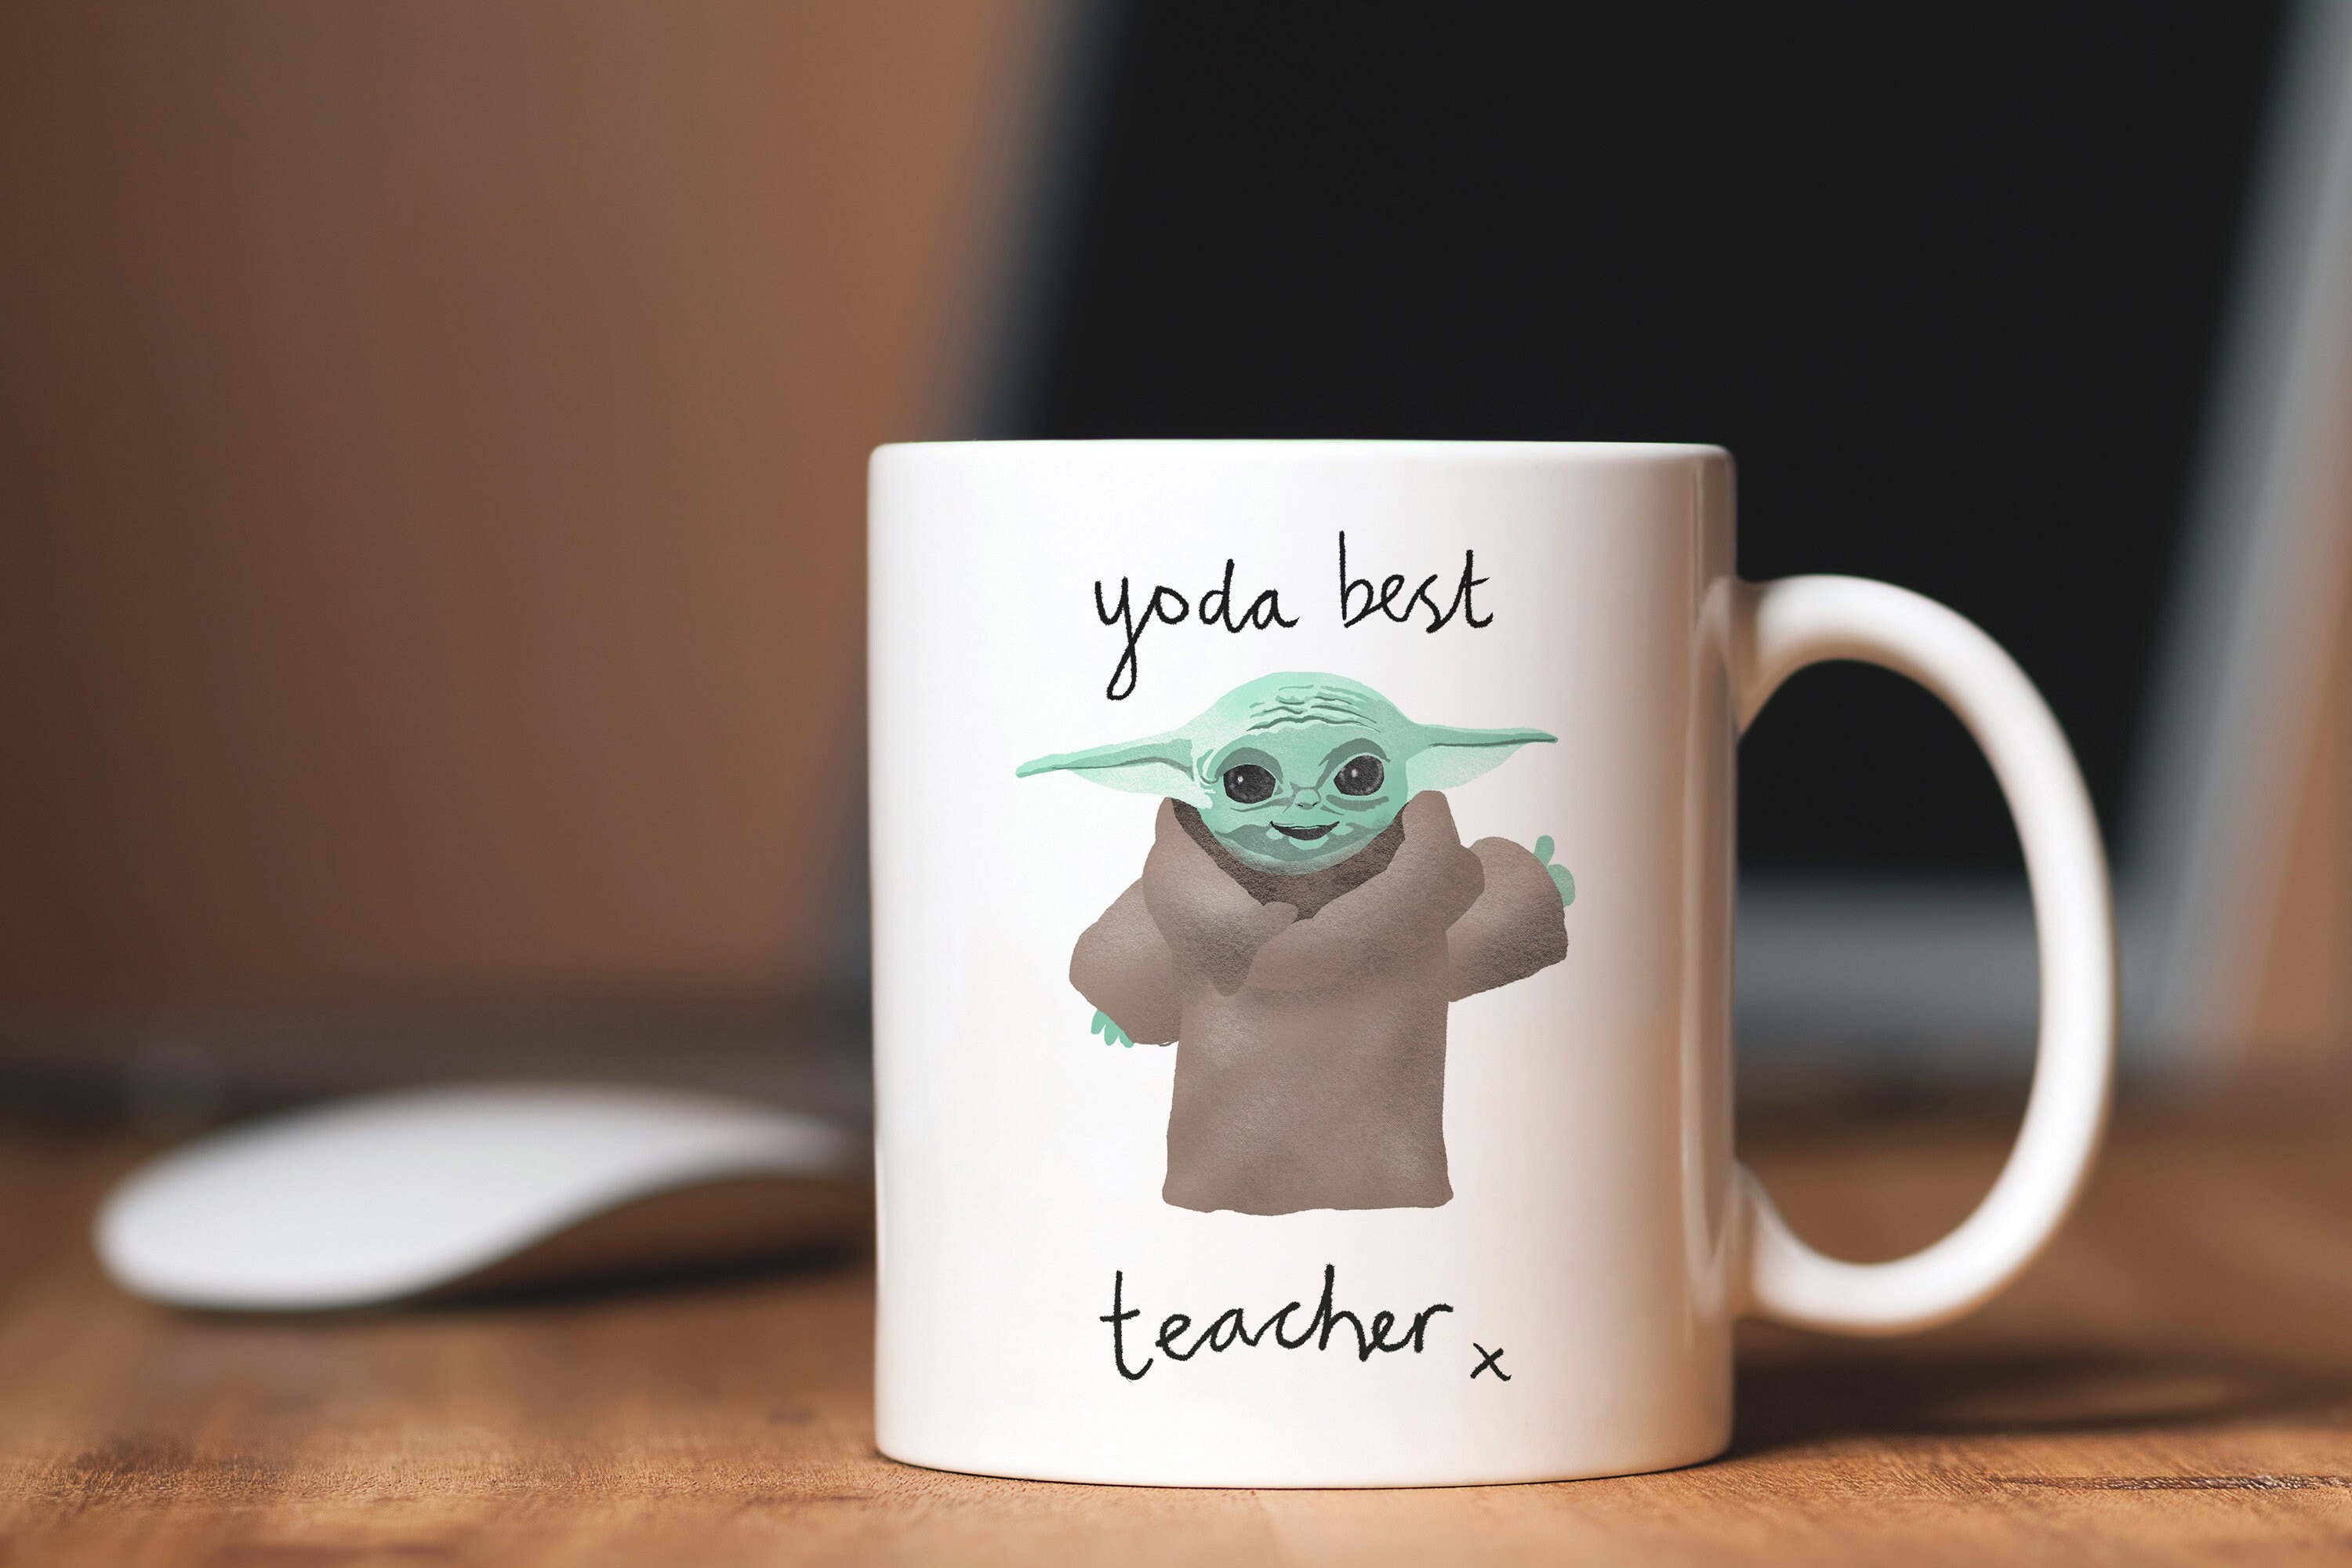 Baby Yoda: 10 lockdown lessons from the cute Mandalorian star - The Big  Issue